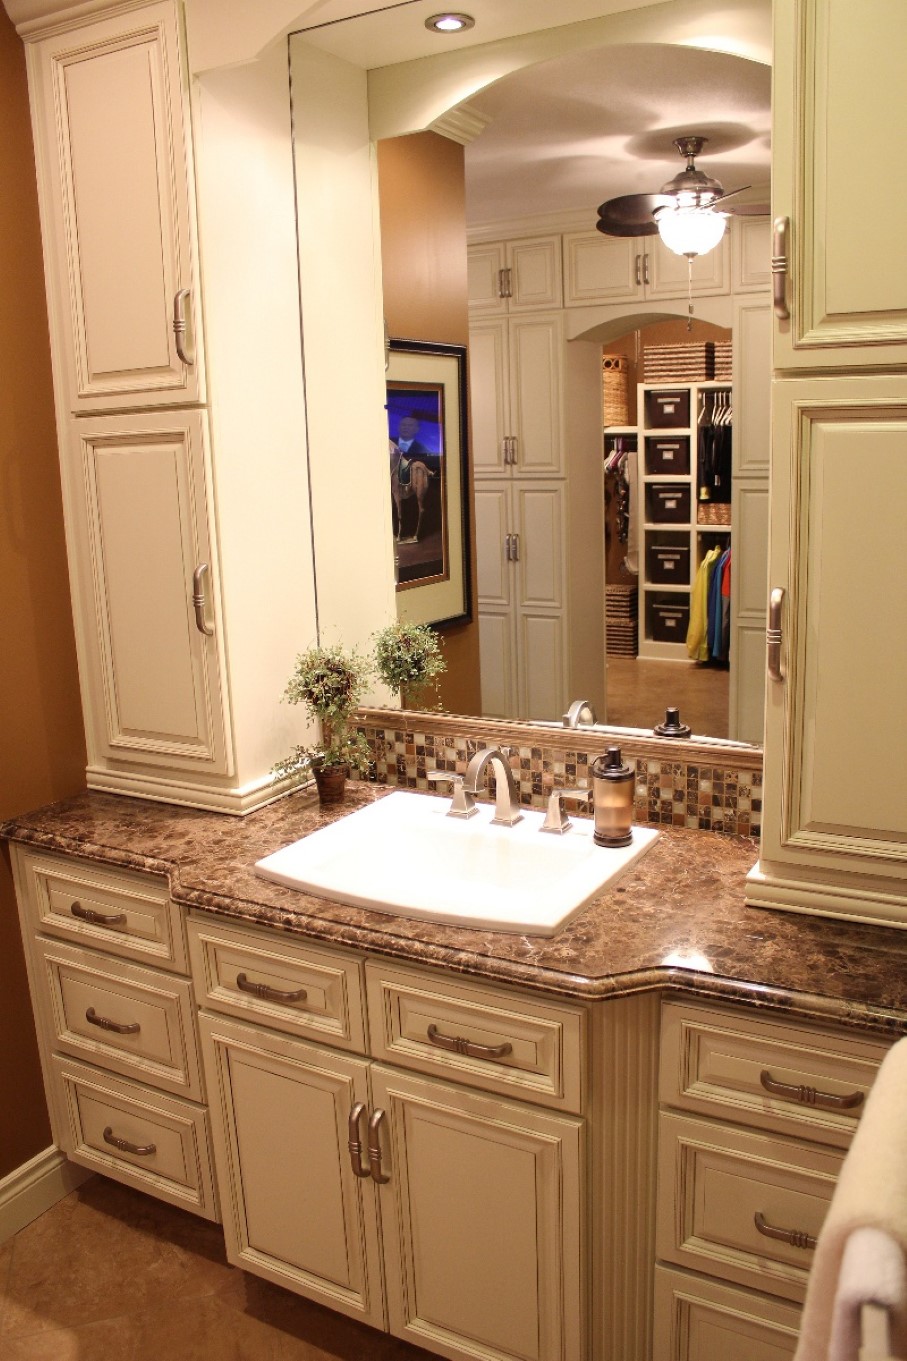 Wall Mirror Awesome Large Wall Mirror Idea And Awesome White Wall Mounted Bathroom Vanity Cabinets Plus Square Shallow Sink  Bathroom Striking Into Modern Bathroom With Various Vanity Cabinets